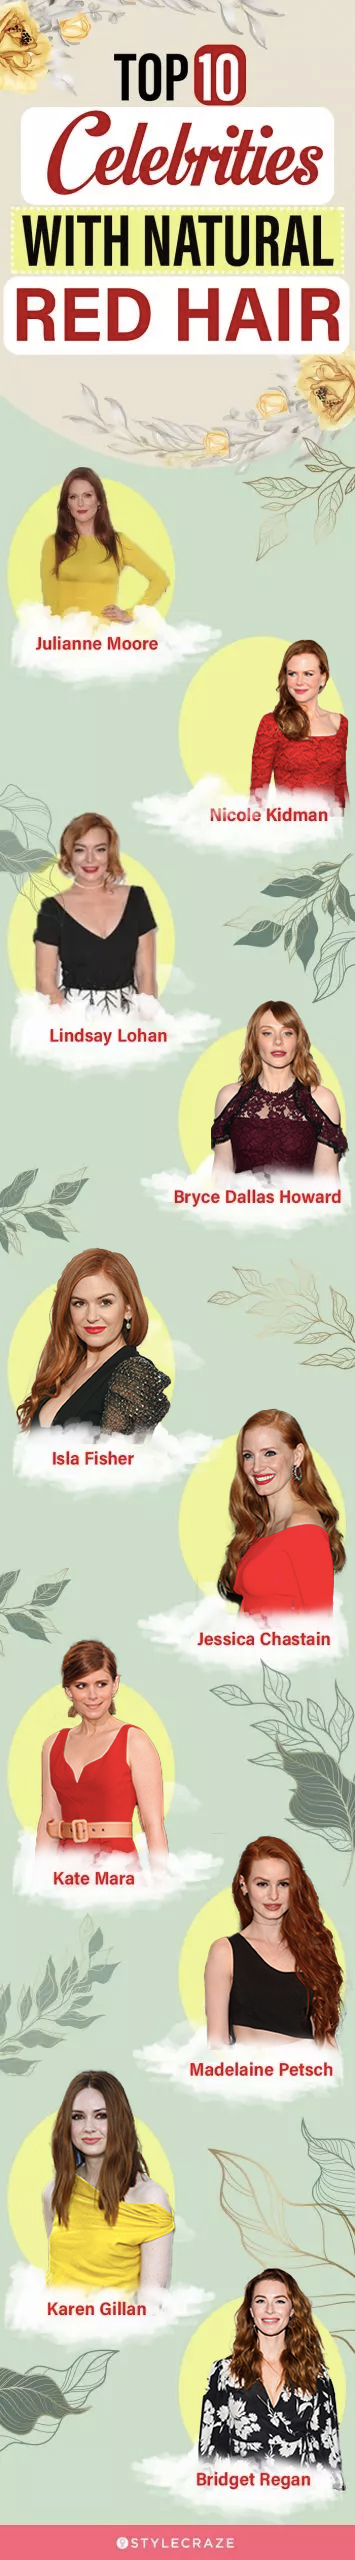 top 10 celebrities with natural red hair (infographic)